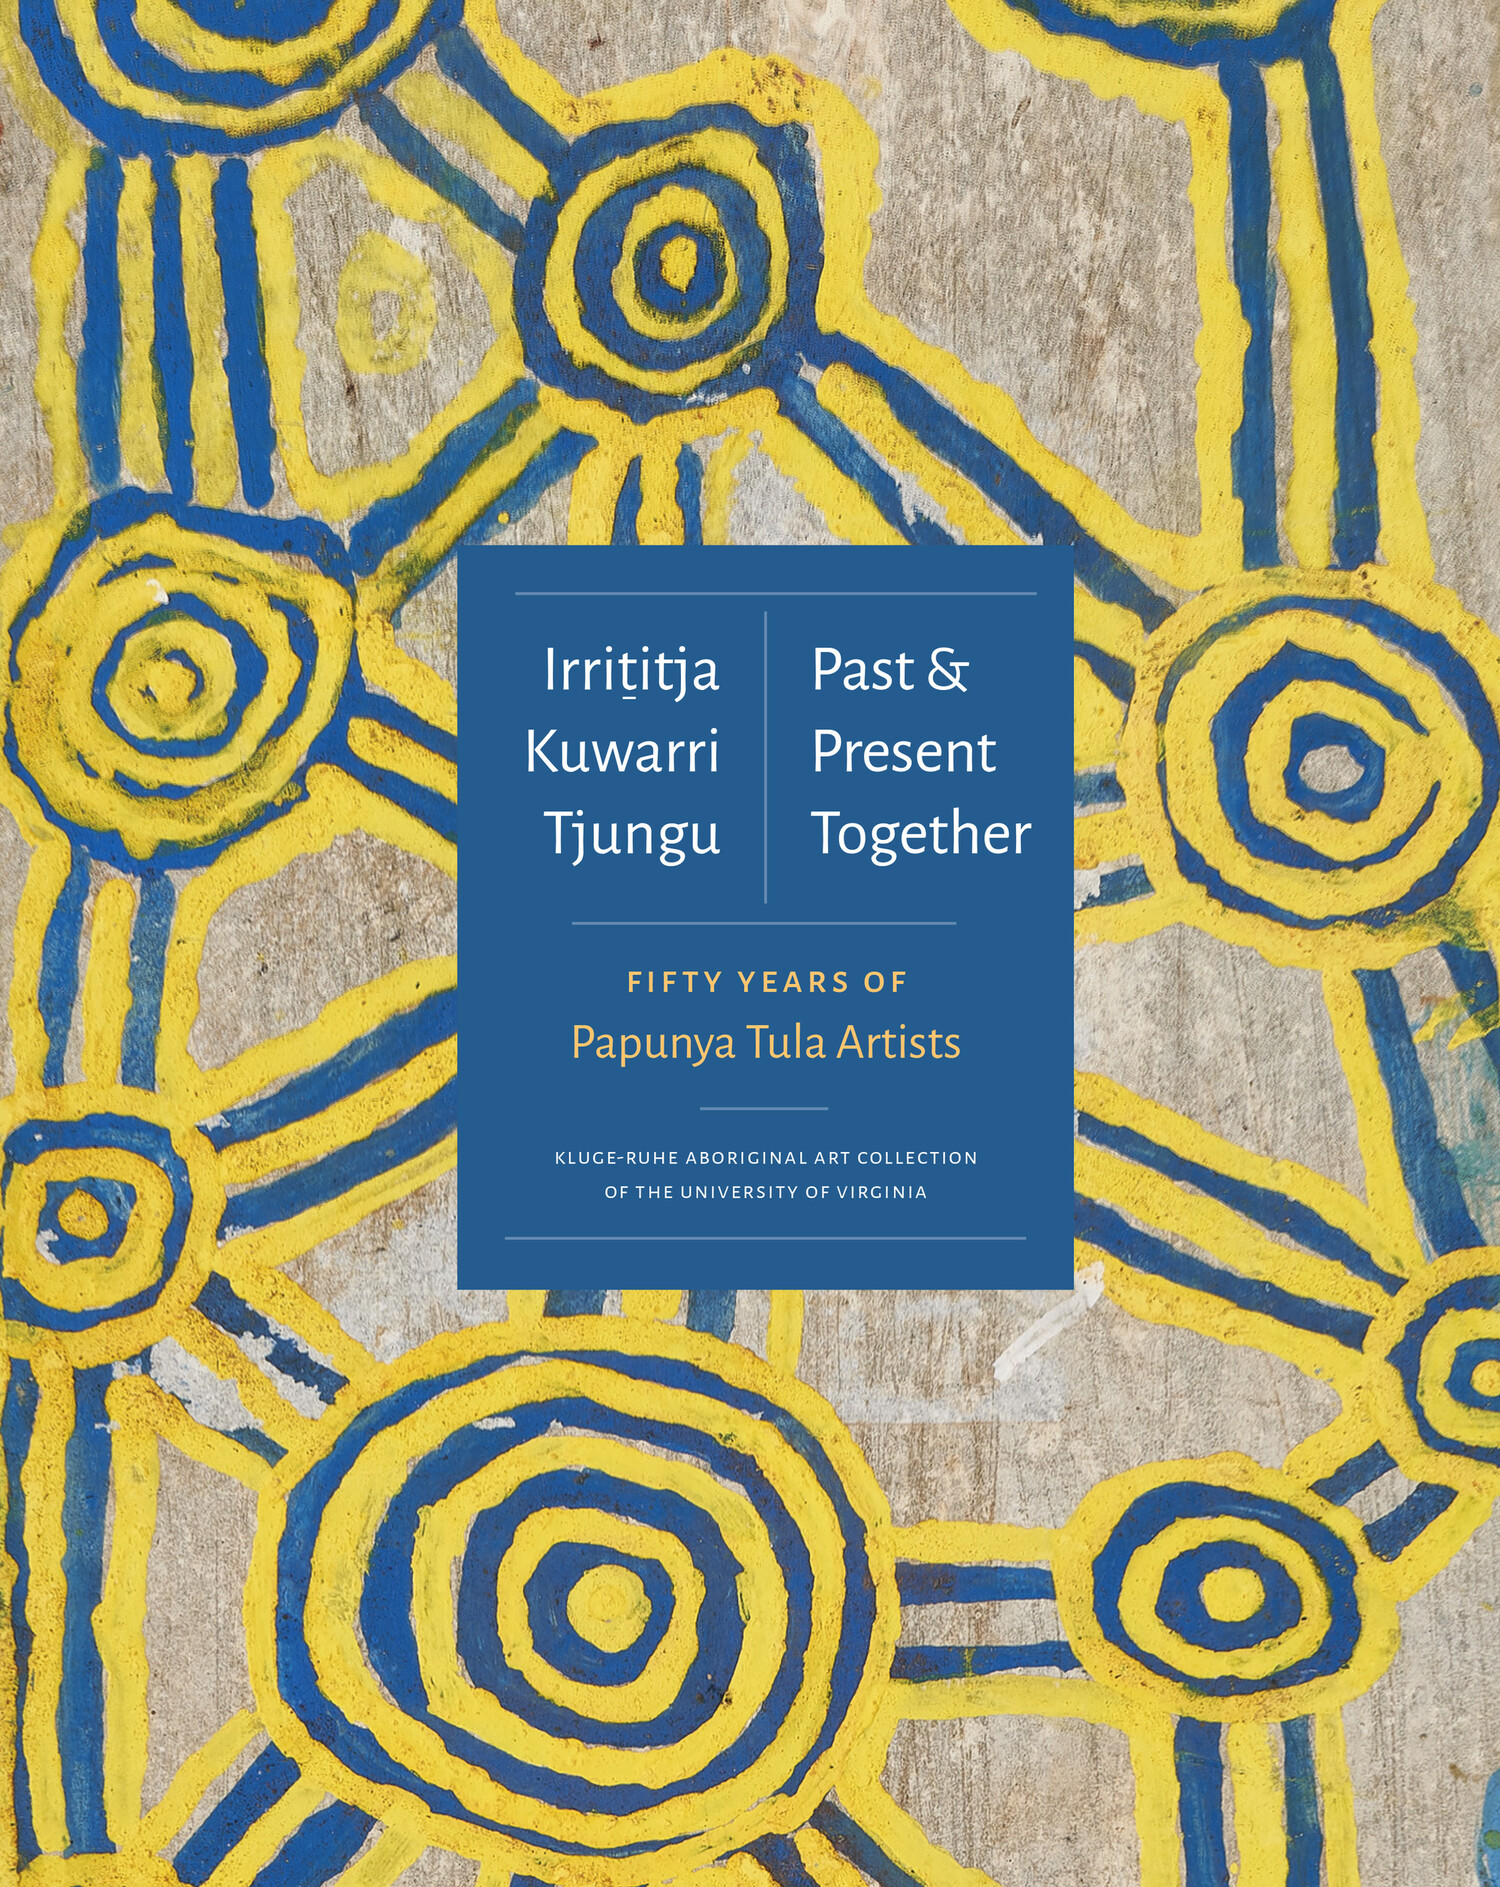 Irrititja Kuwarri Tjungu (Past and Present Together)
Fifty Years of Papunya Tula Artists
Edited by Fred Myers and Henry Skerritt